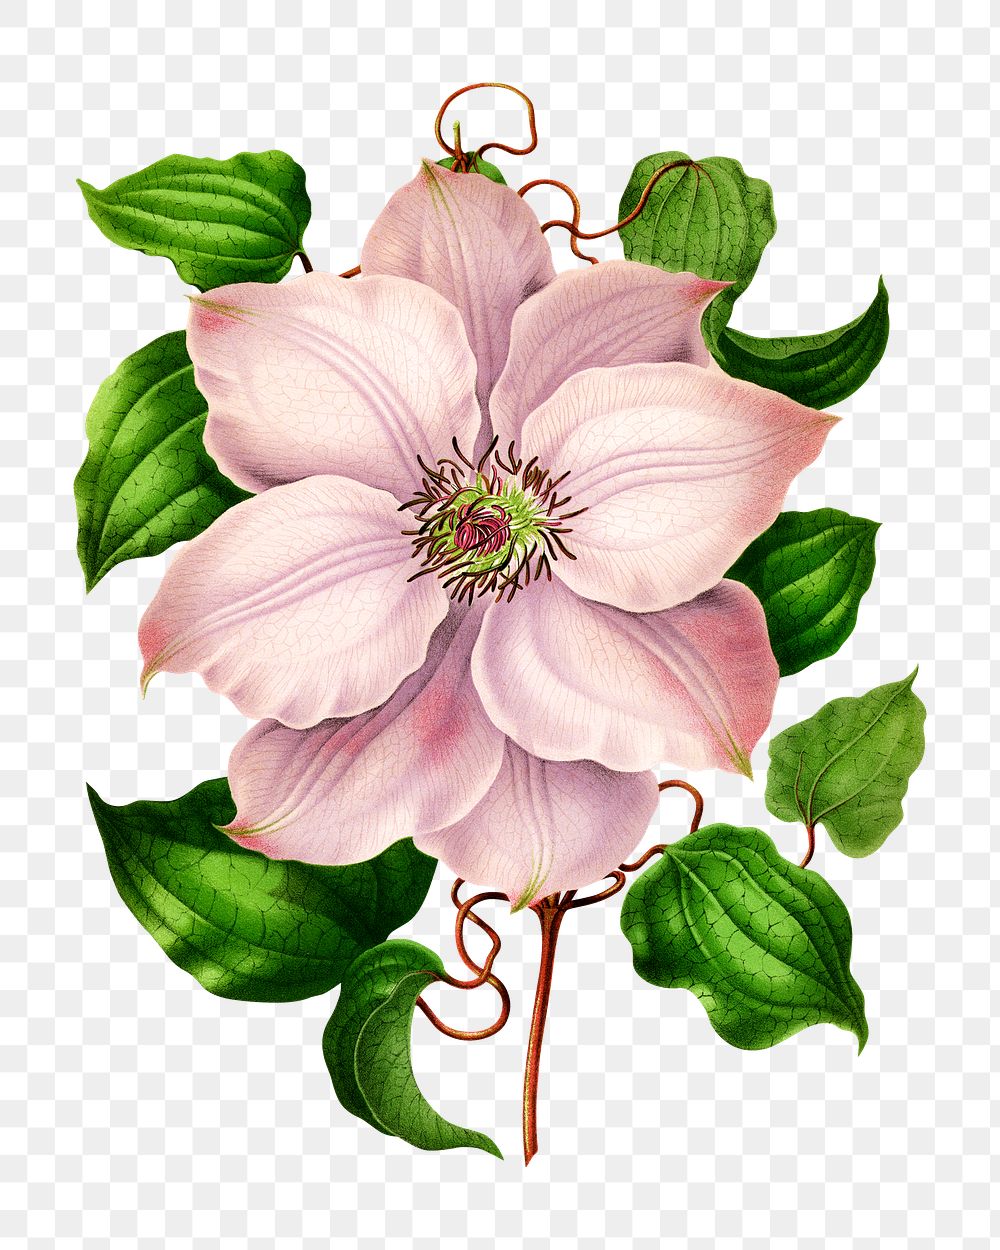 PNG vintage pink clematis flower illustration, transparent background. Remixed from our own original 1879 edition of…